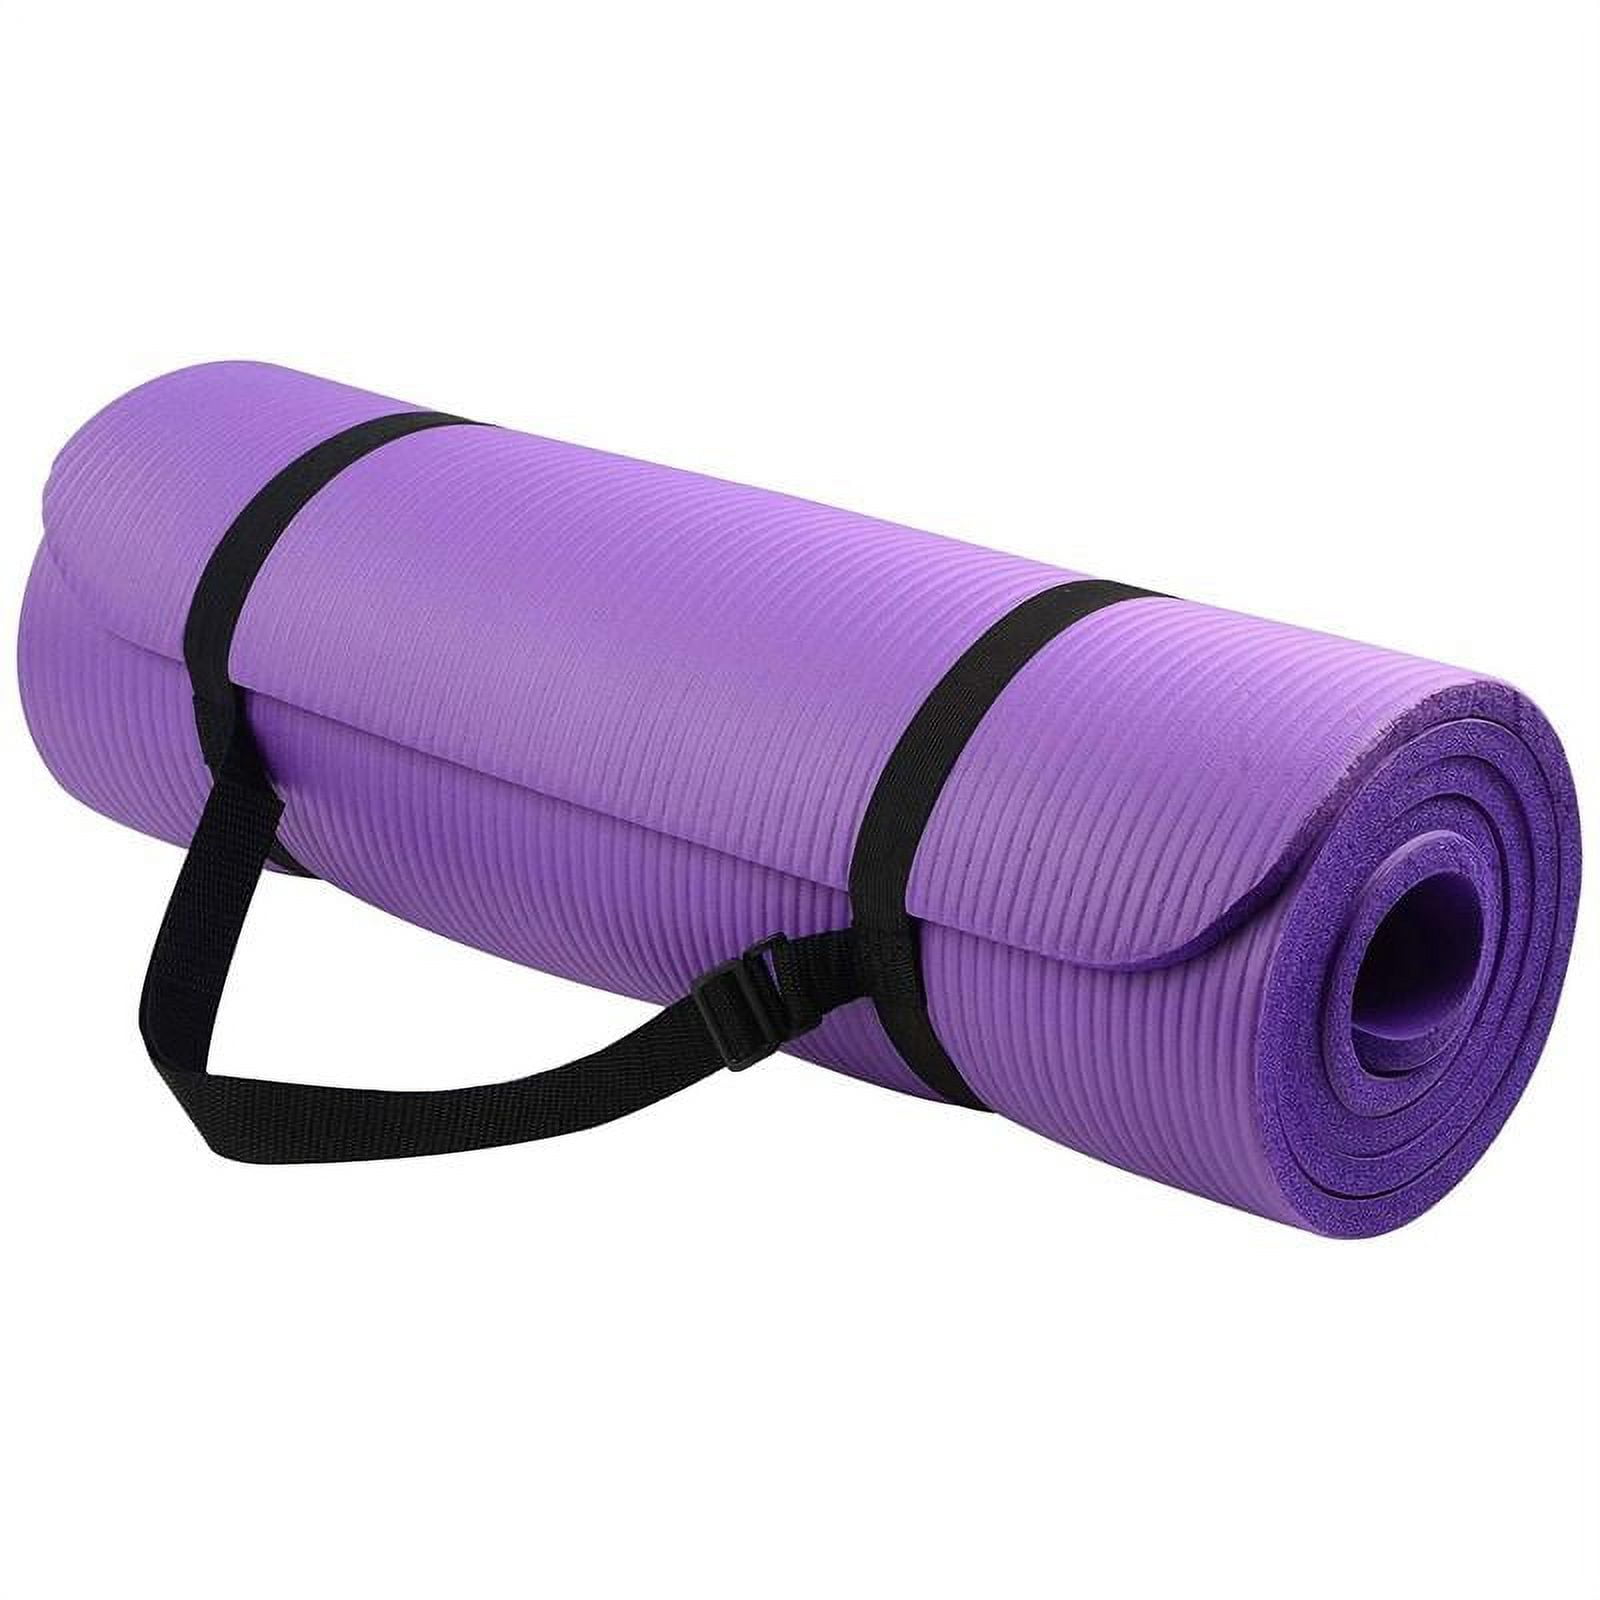 BalanceFrom All-Purpose 1/2 In. Exercise Yoga Mat